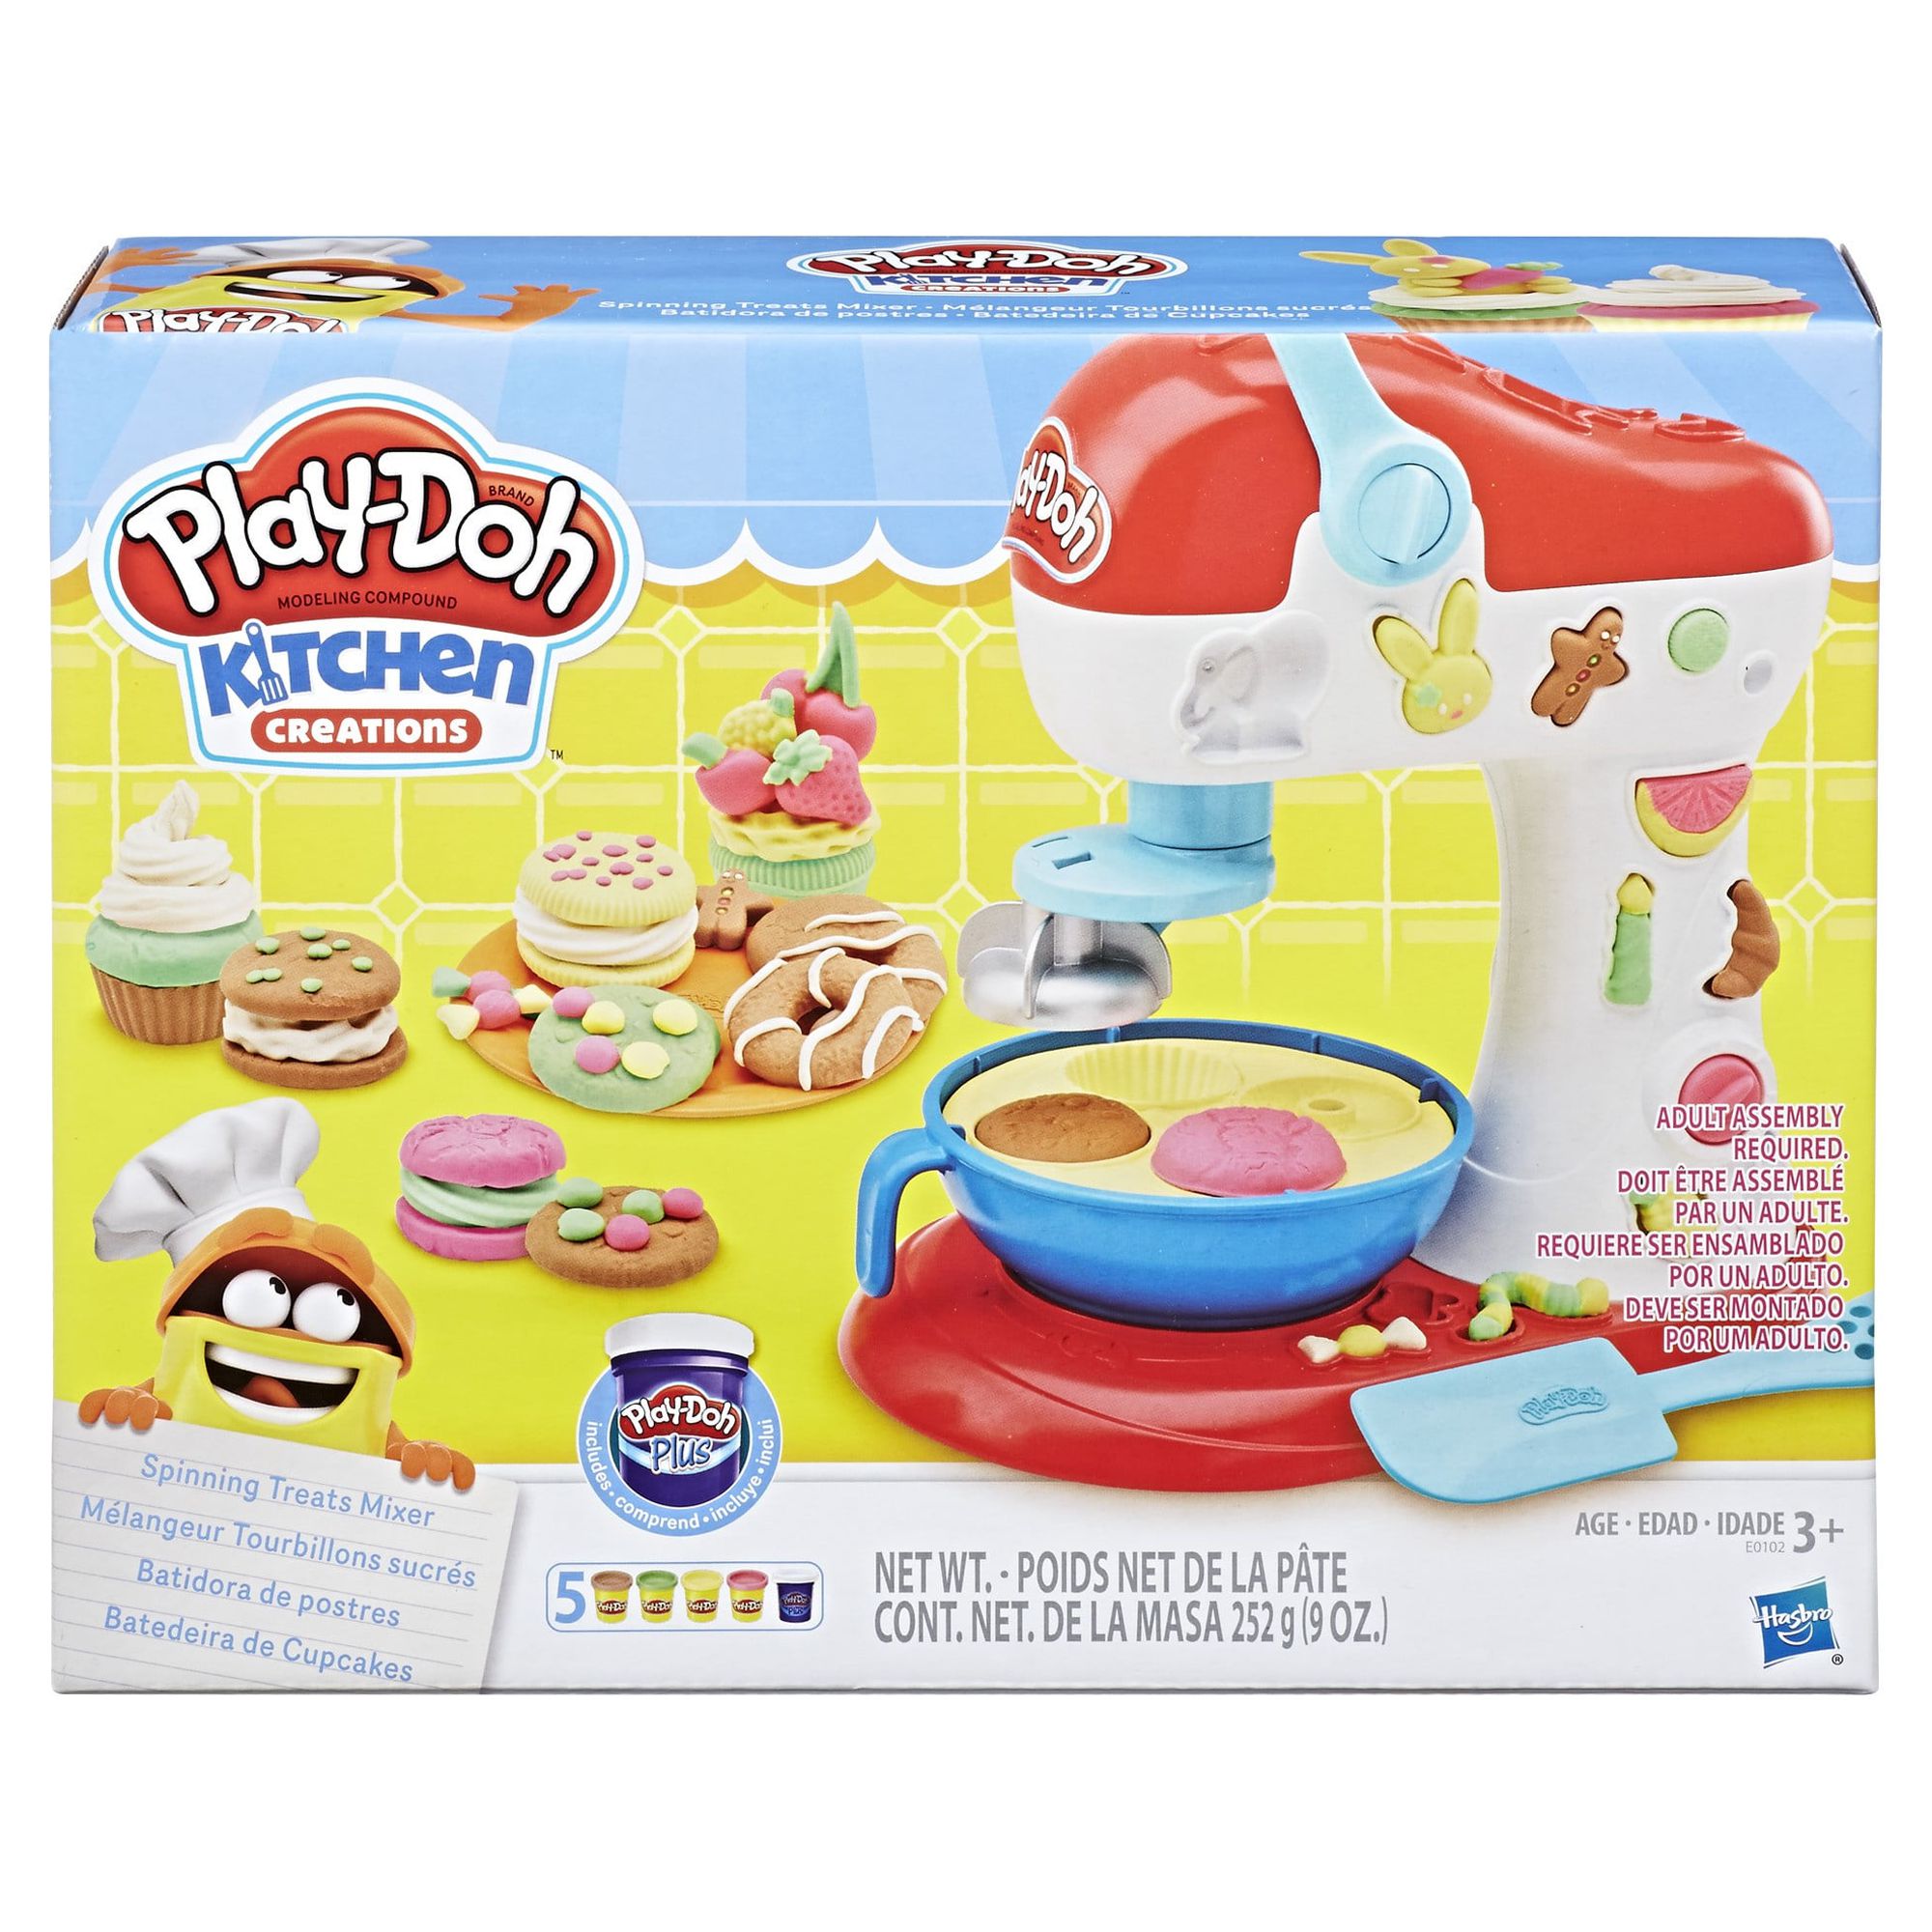 Play-Doh Kitchen Creations Spinning Treats Mixer Food Set with 5 Cans - image 1 of 16